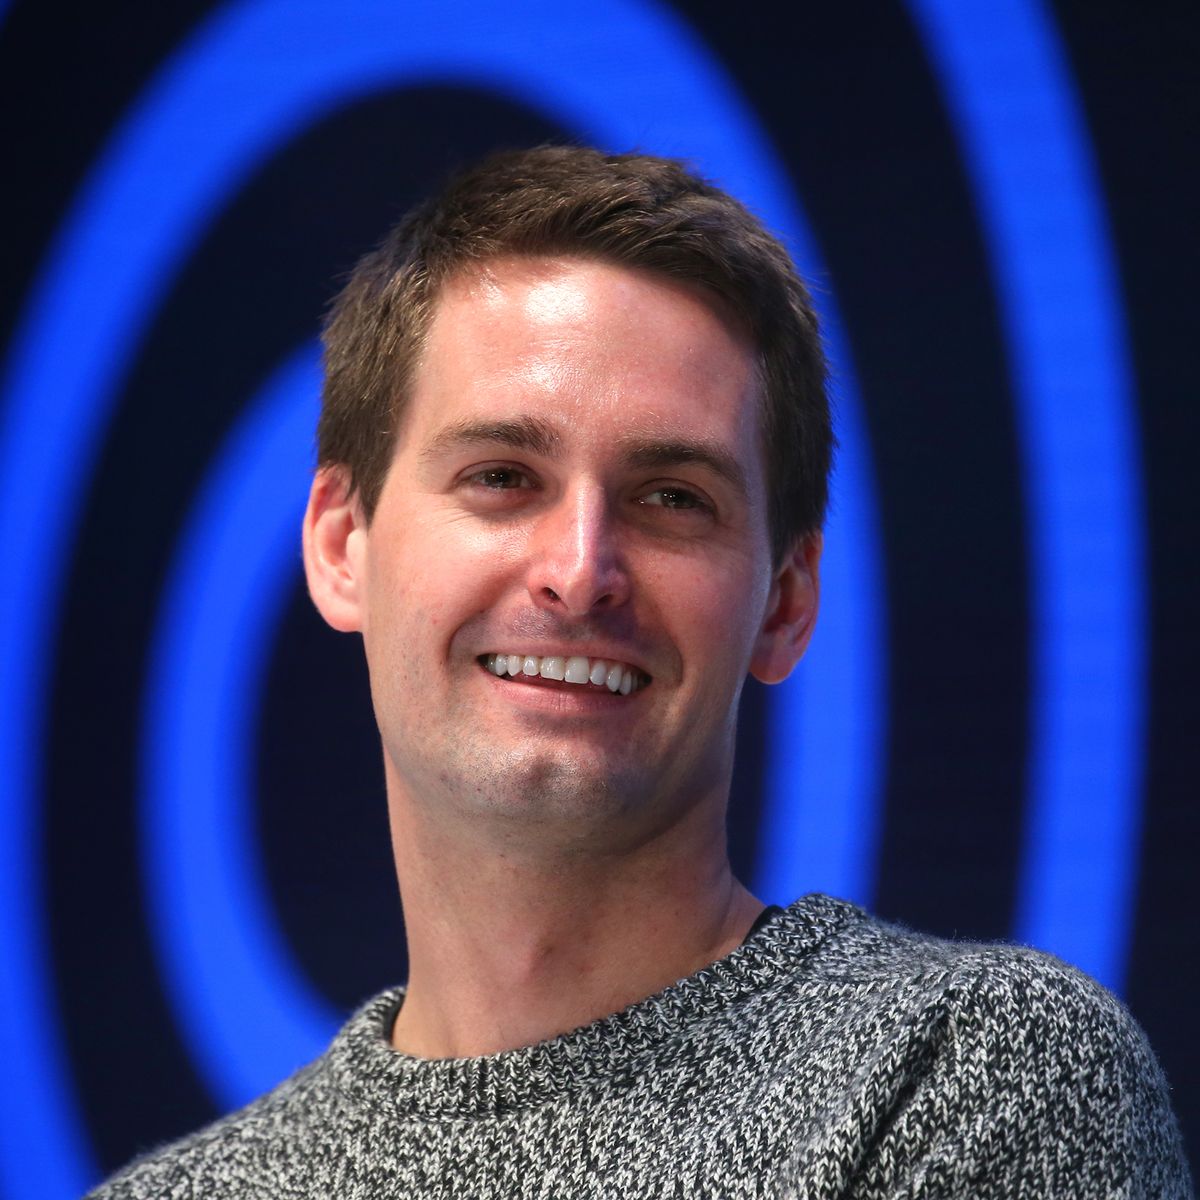 Evan Spiegel: the Life, Career, and Education of the Snap CEO